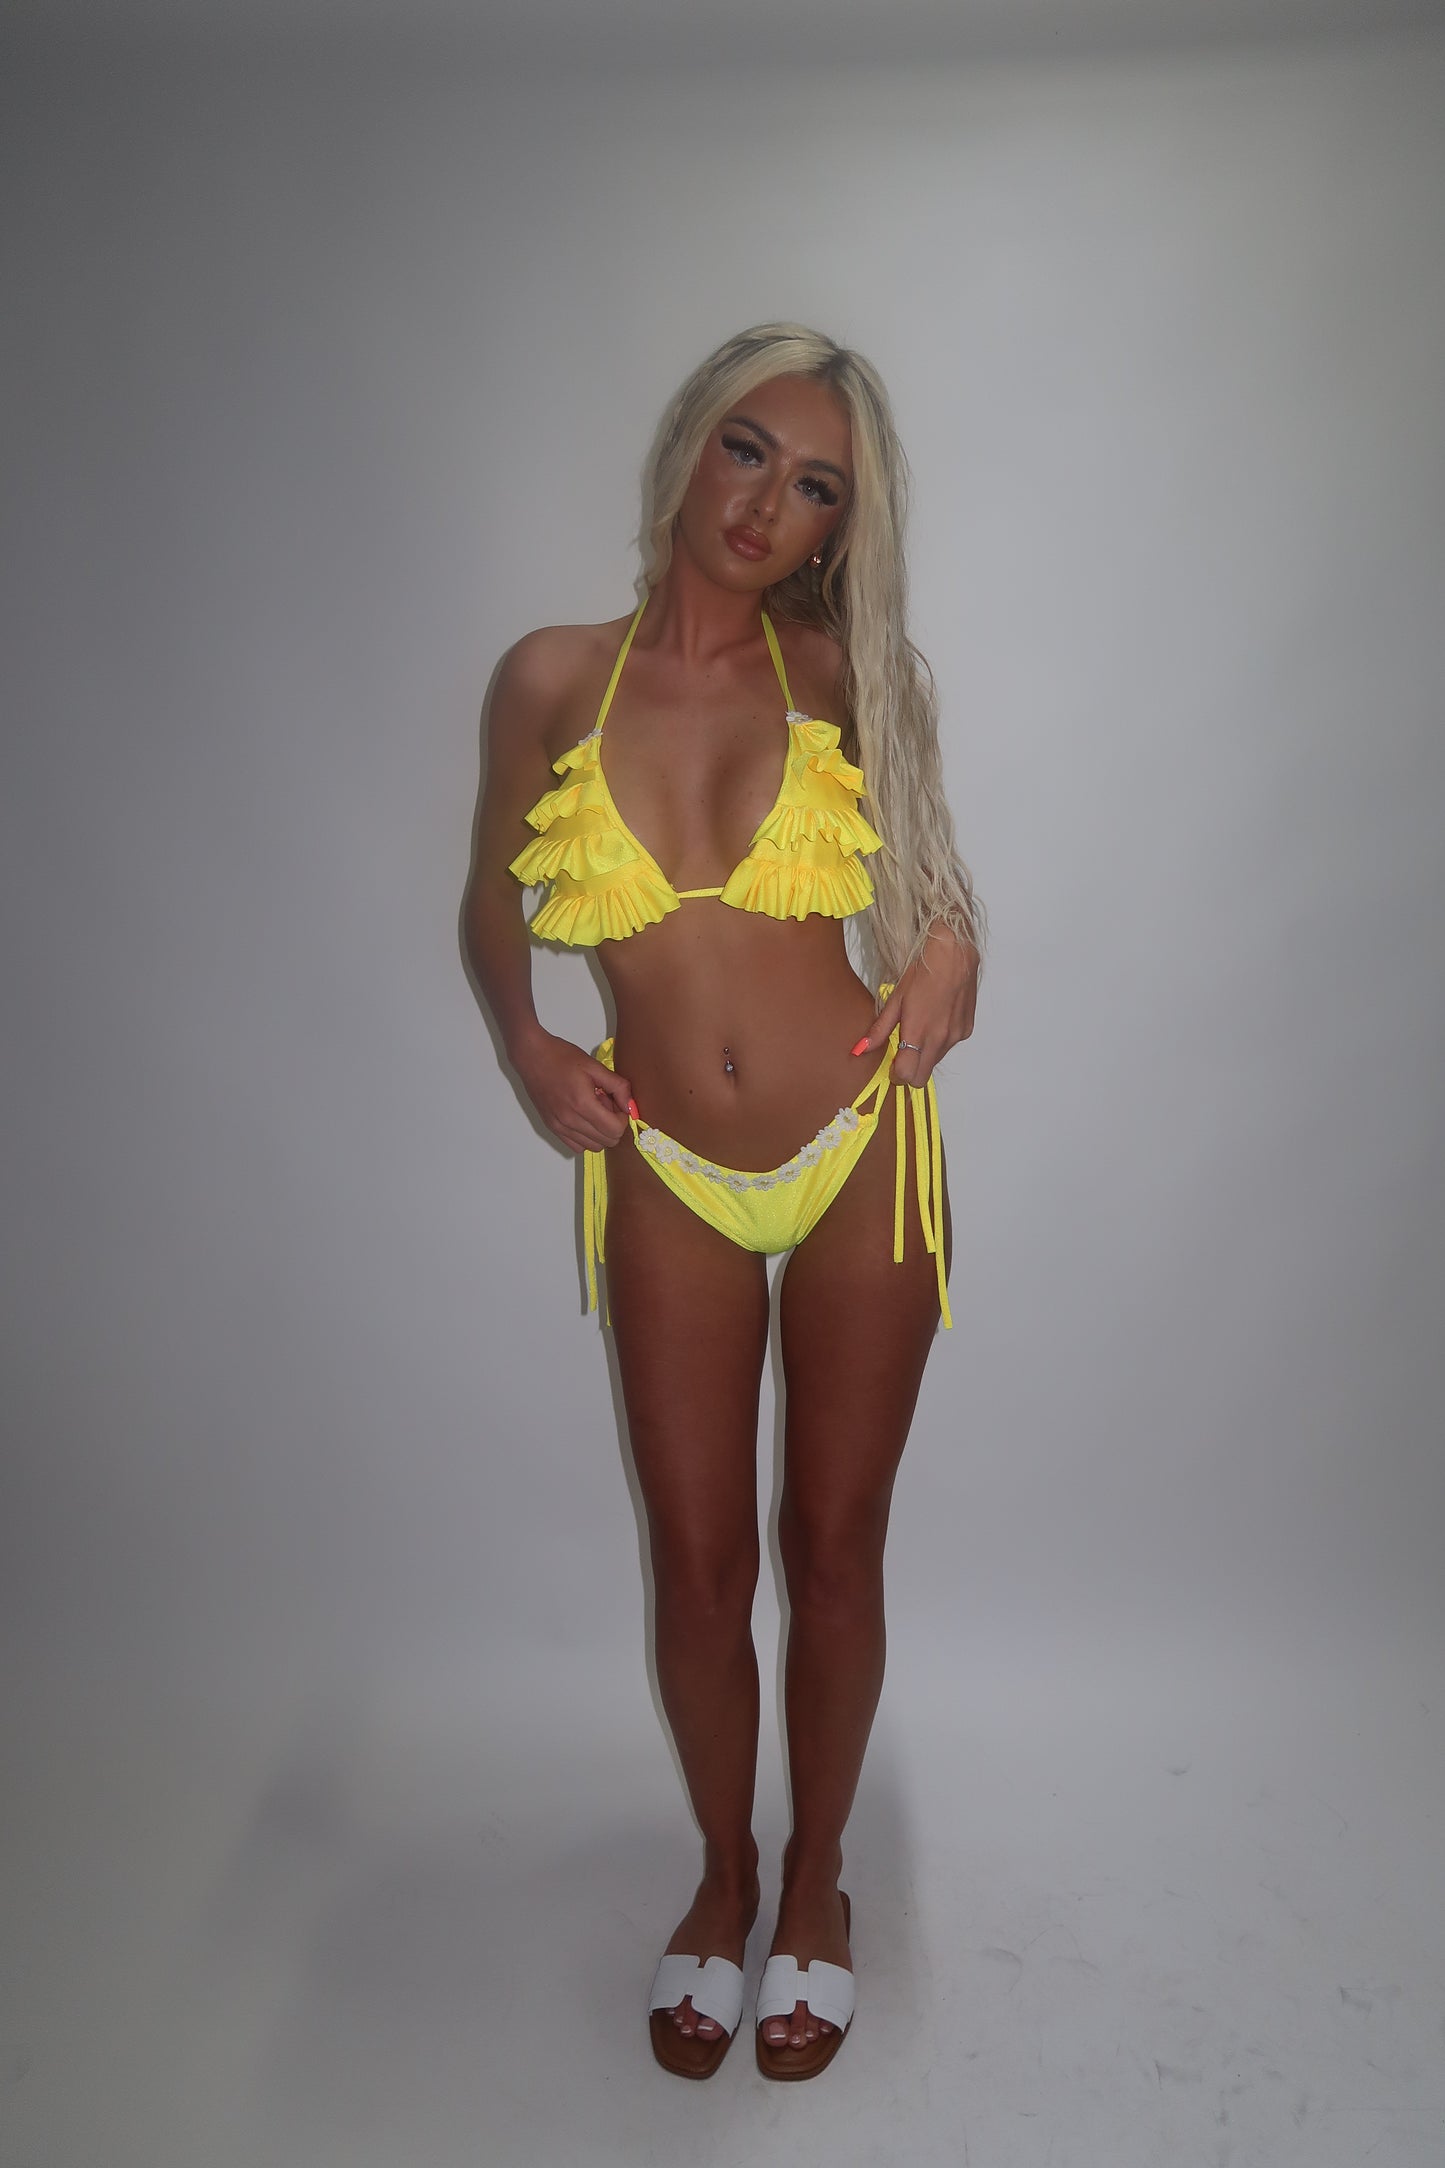 LIMITED EDITION HAND MADE AND DESIGNED IN HOUSE: ‘Daisy’ Bikini